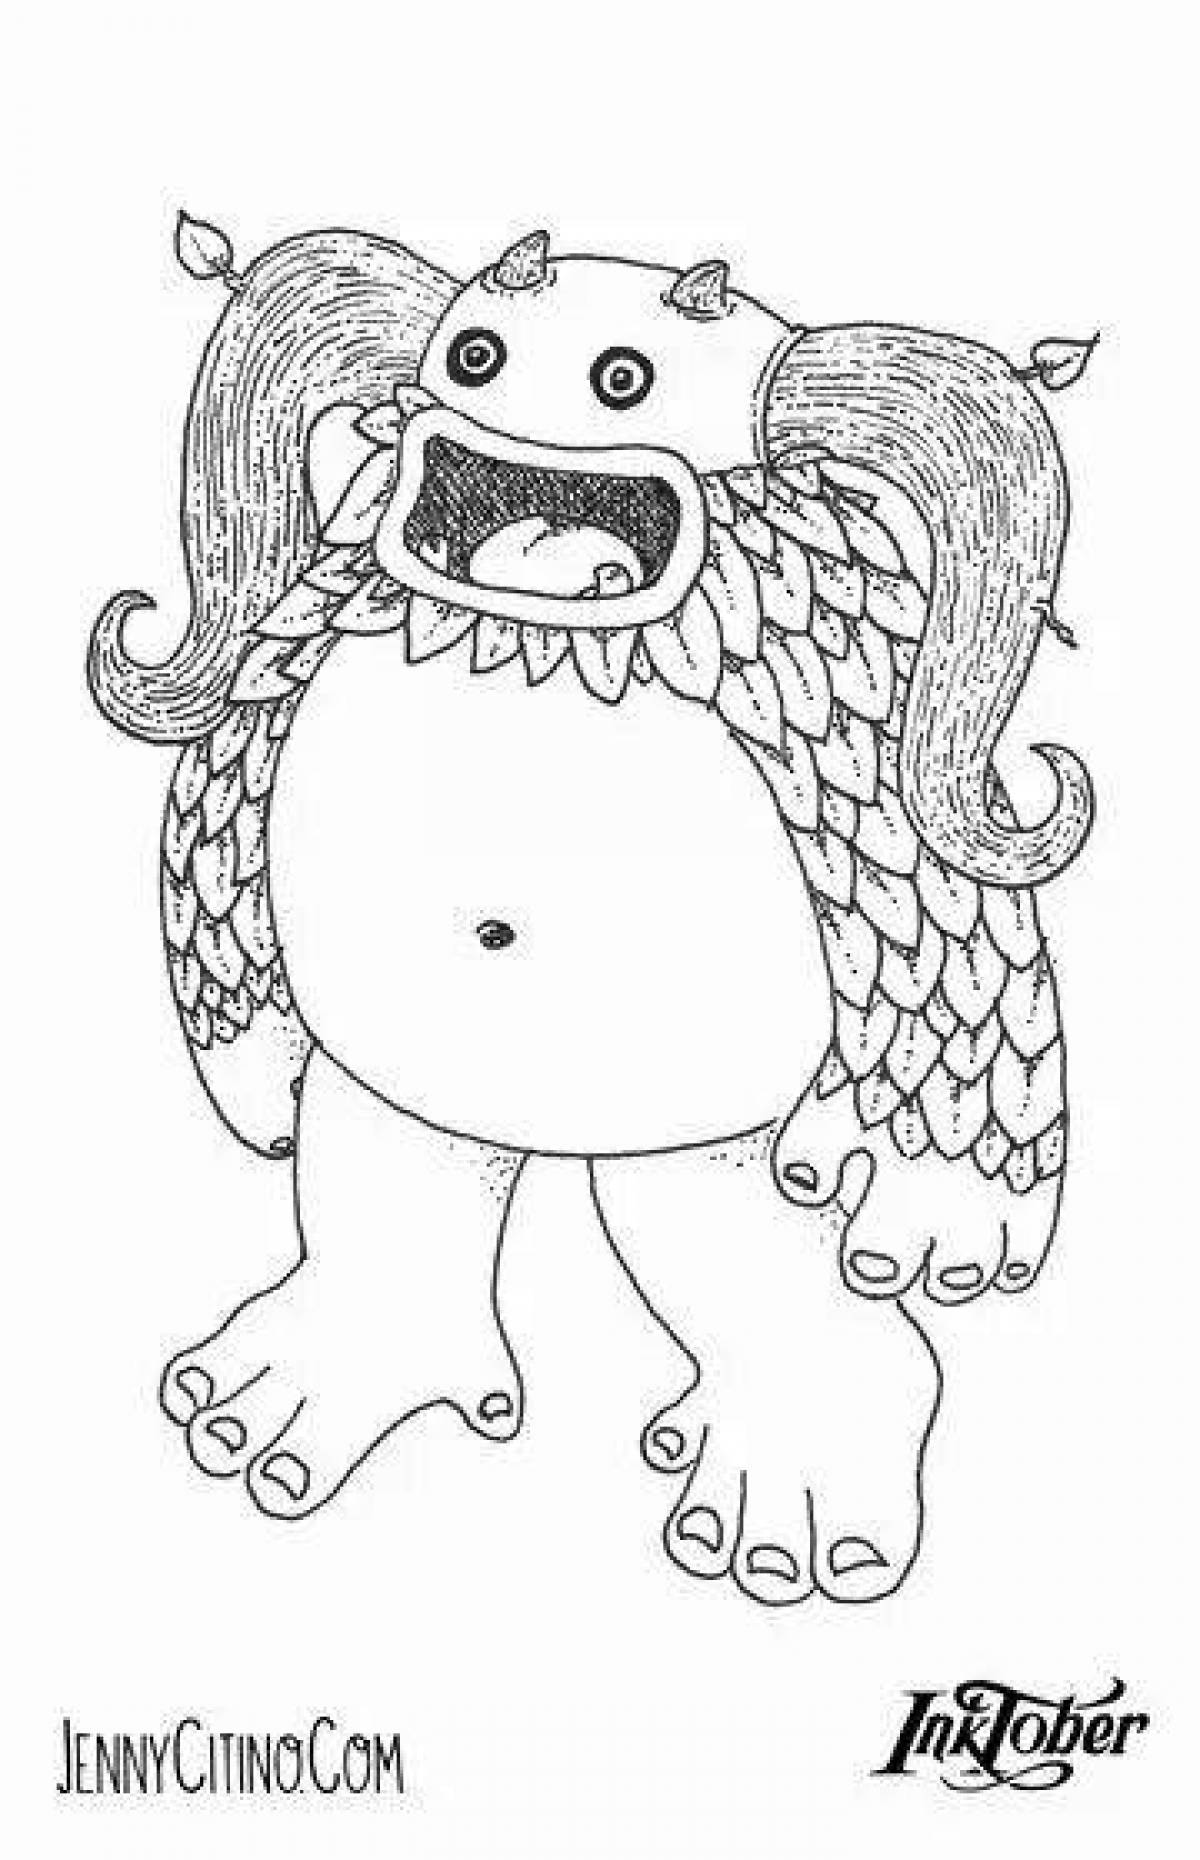 Adorable May Singing Monster coloring book